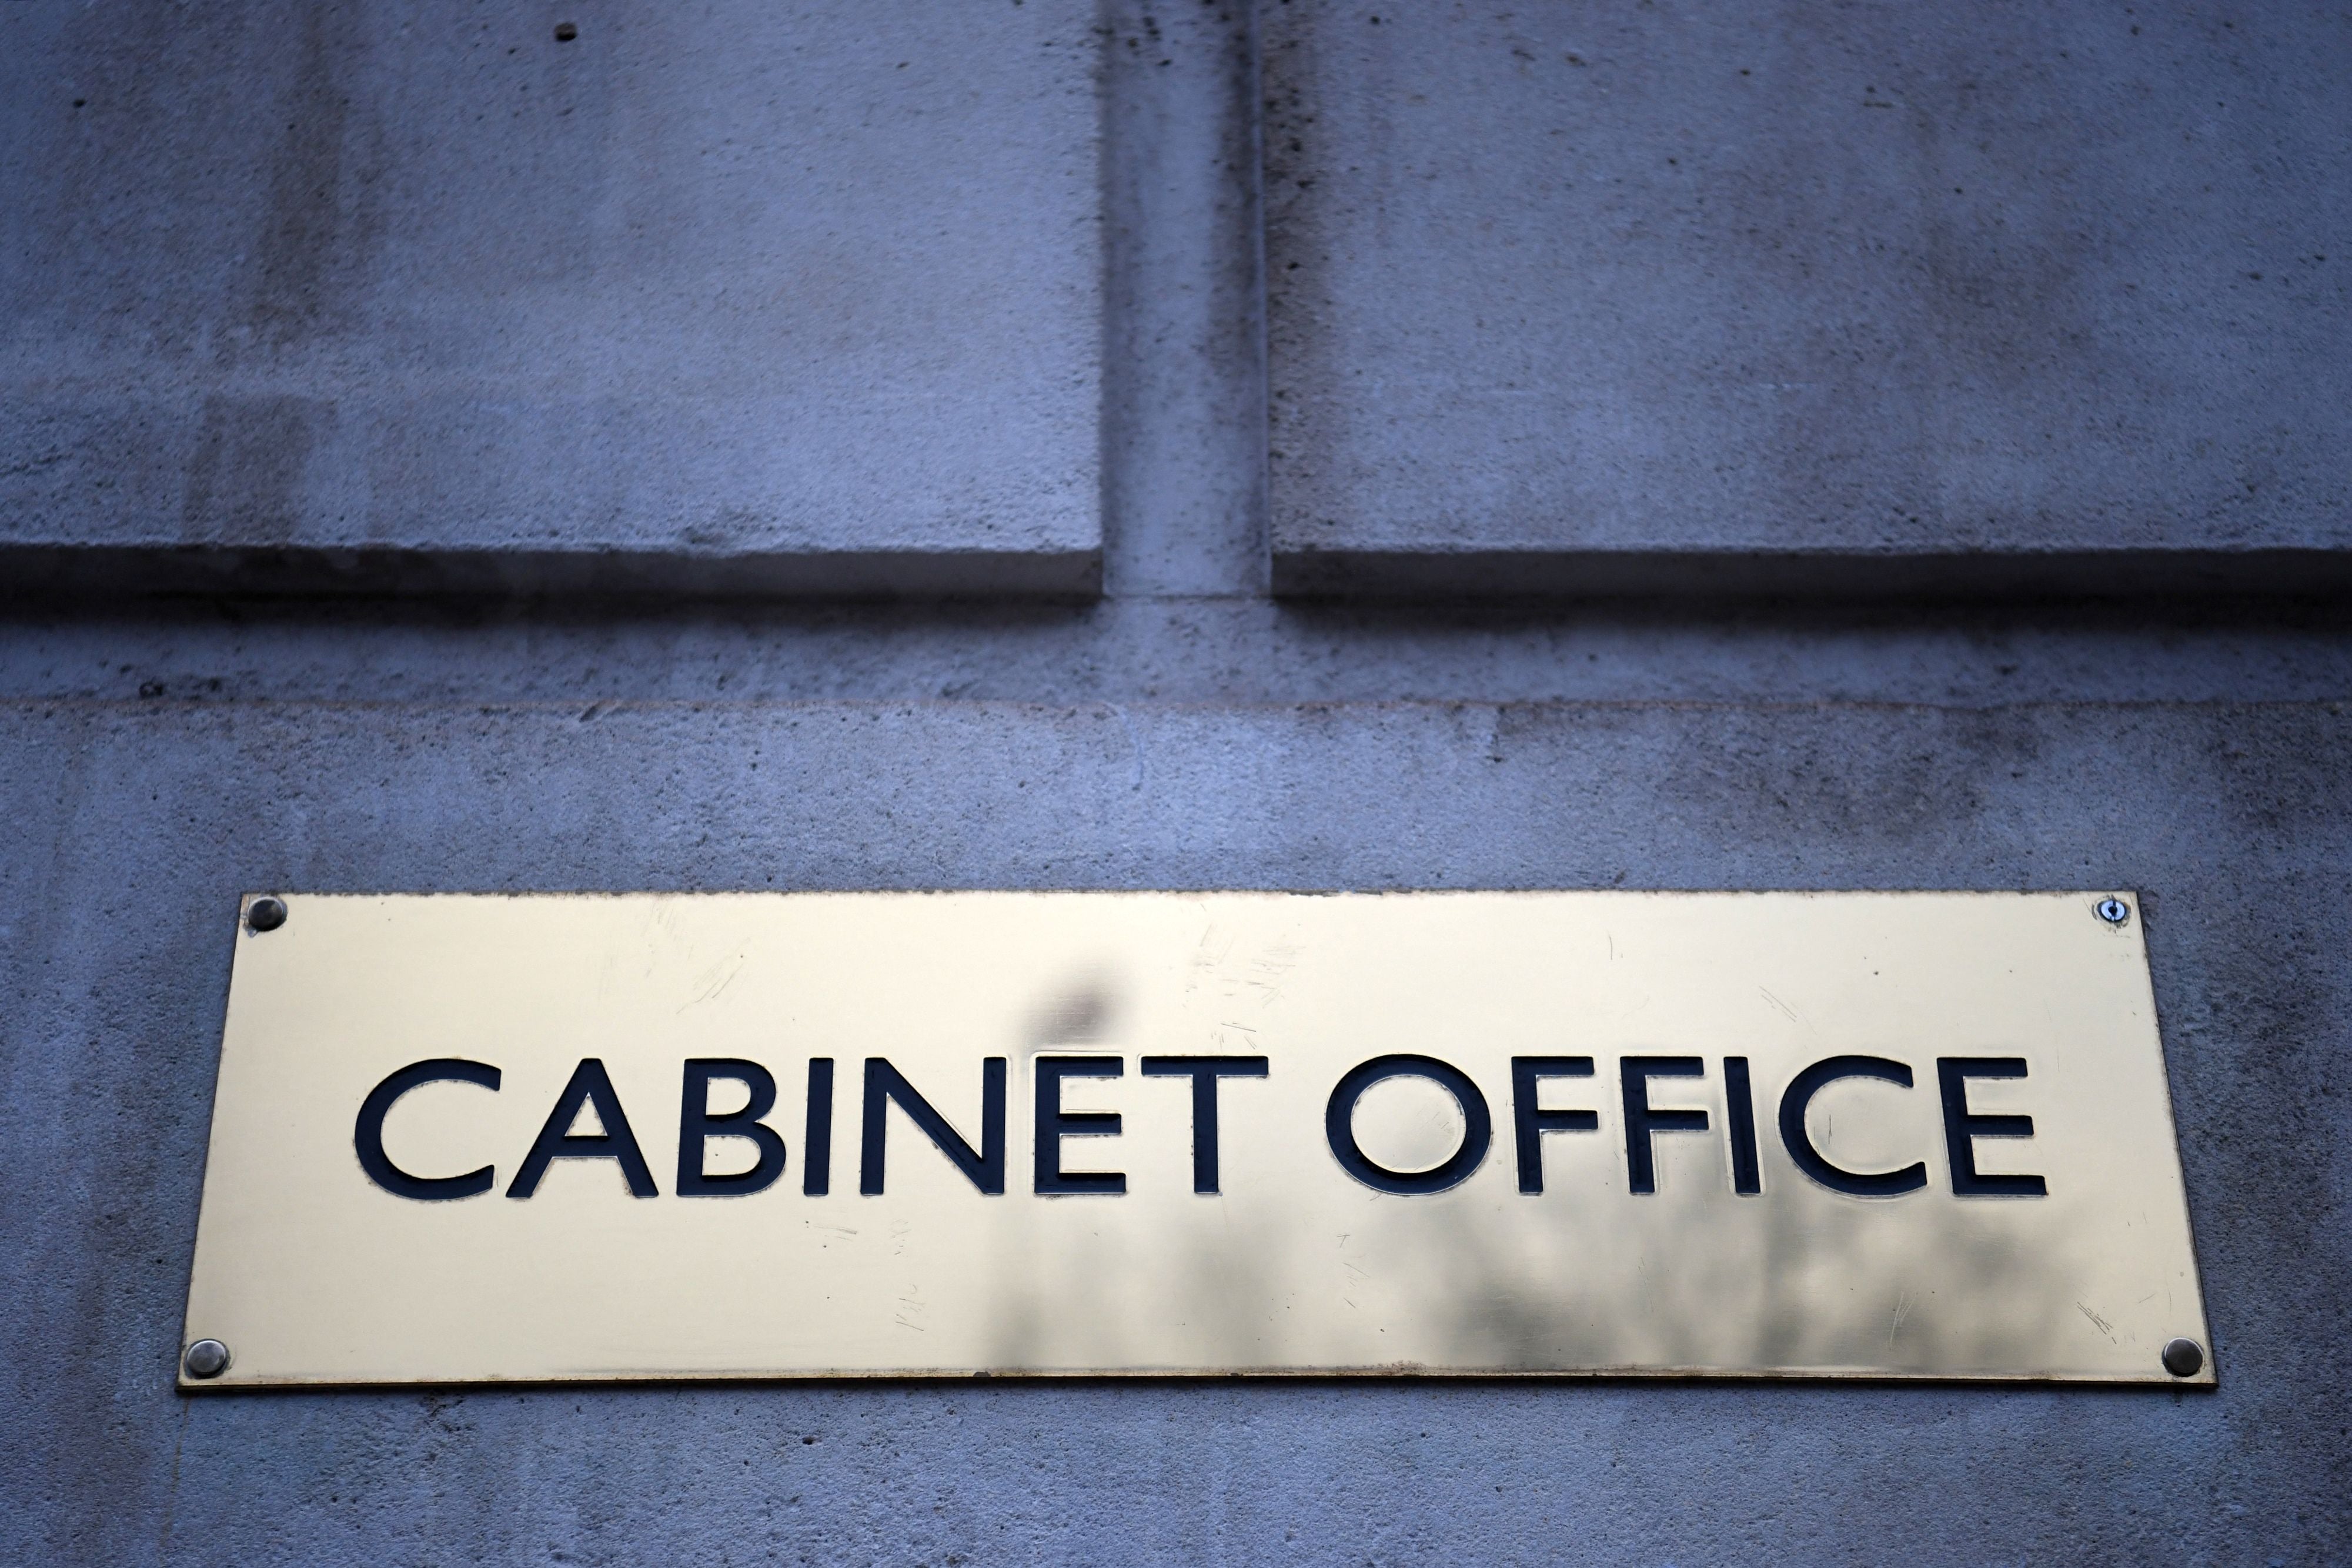 <p><em>The Independent</em> previously revealed concerns about systemic problems within the Cabinet Office from a top civil servant.</p>